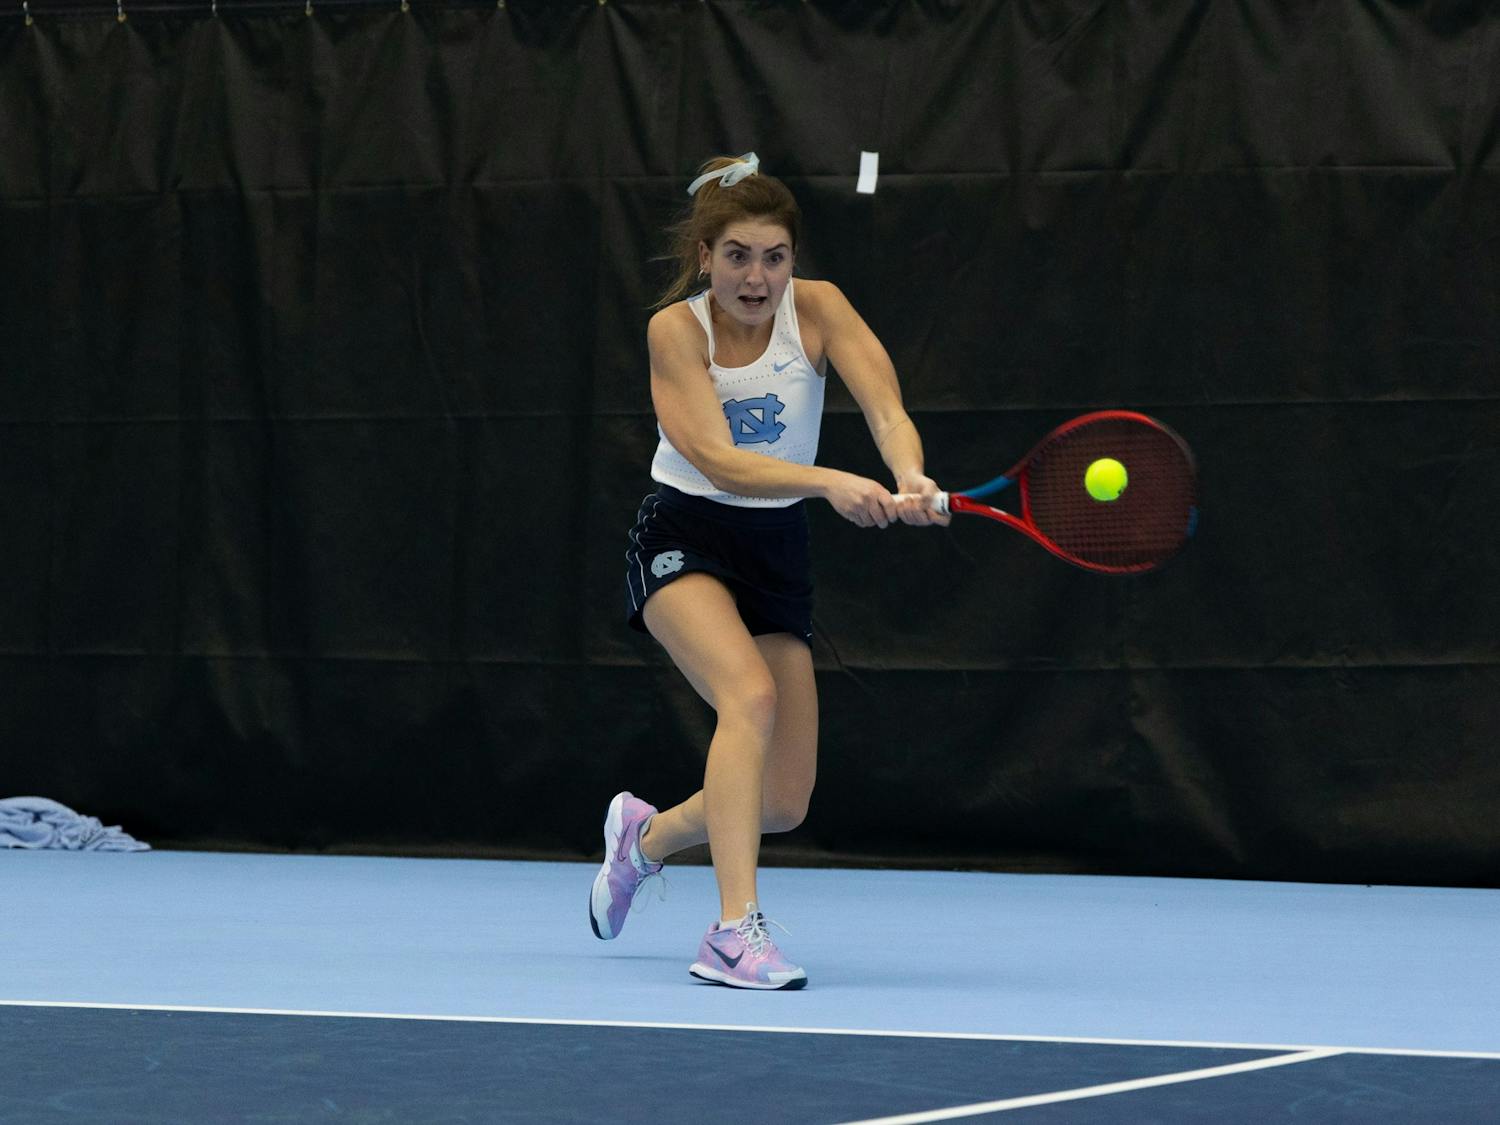 Junior Fiona Crawley returns the ball during her singles match against Elon University at the Cone-Kenfield Tennis Center on  Friday, January 13, 2023. UNC beat Elon 4-2.